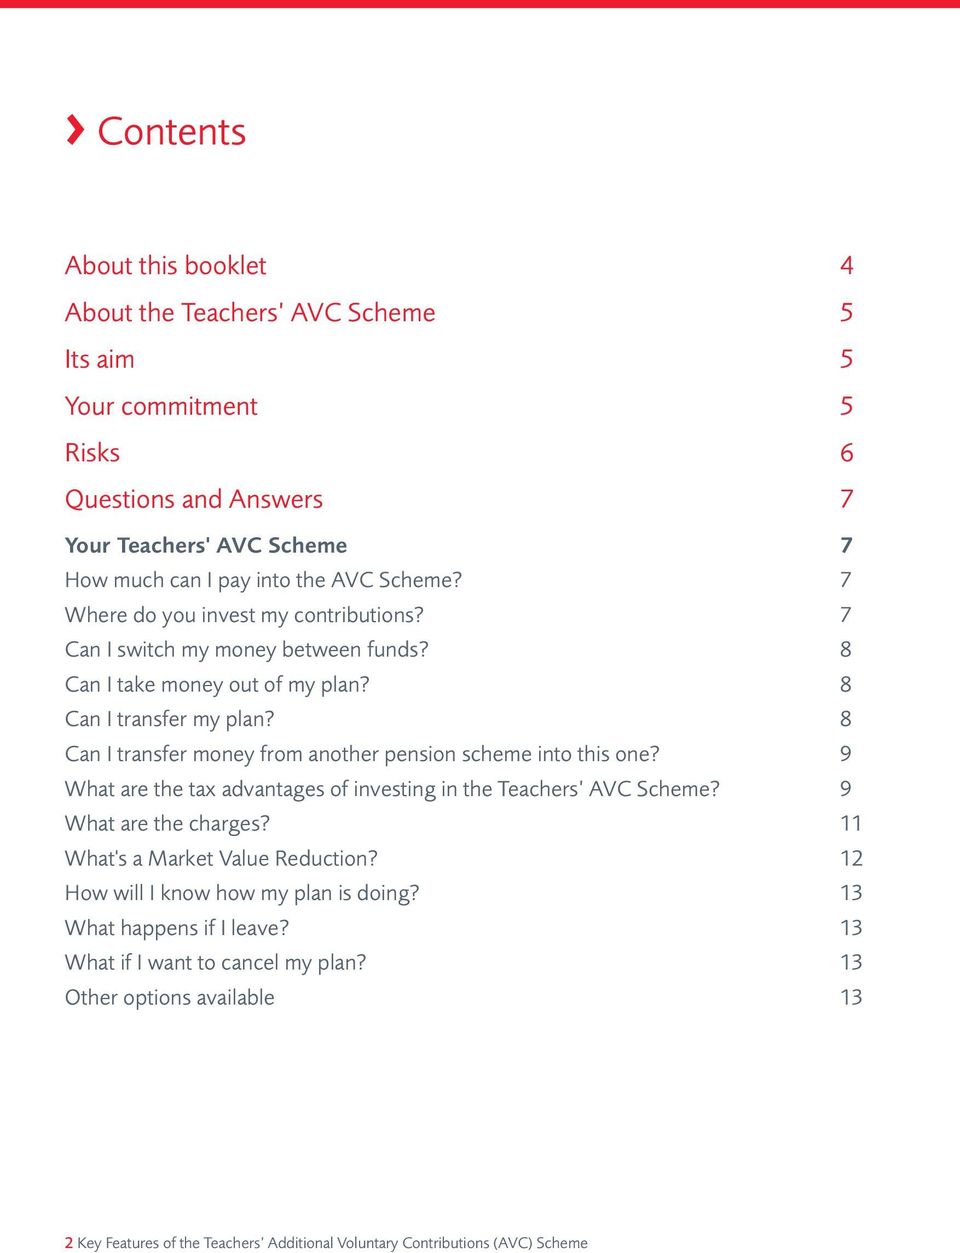 8 Can I transfer money from another pension scheme into this one? 9 What are the tax advantages of investing in the Teachers AVC Scheme? 9 What are the charges?